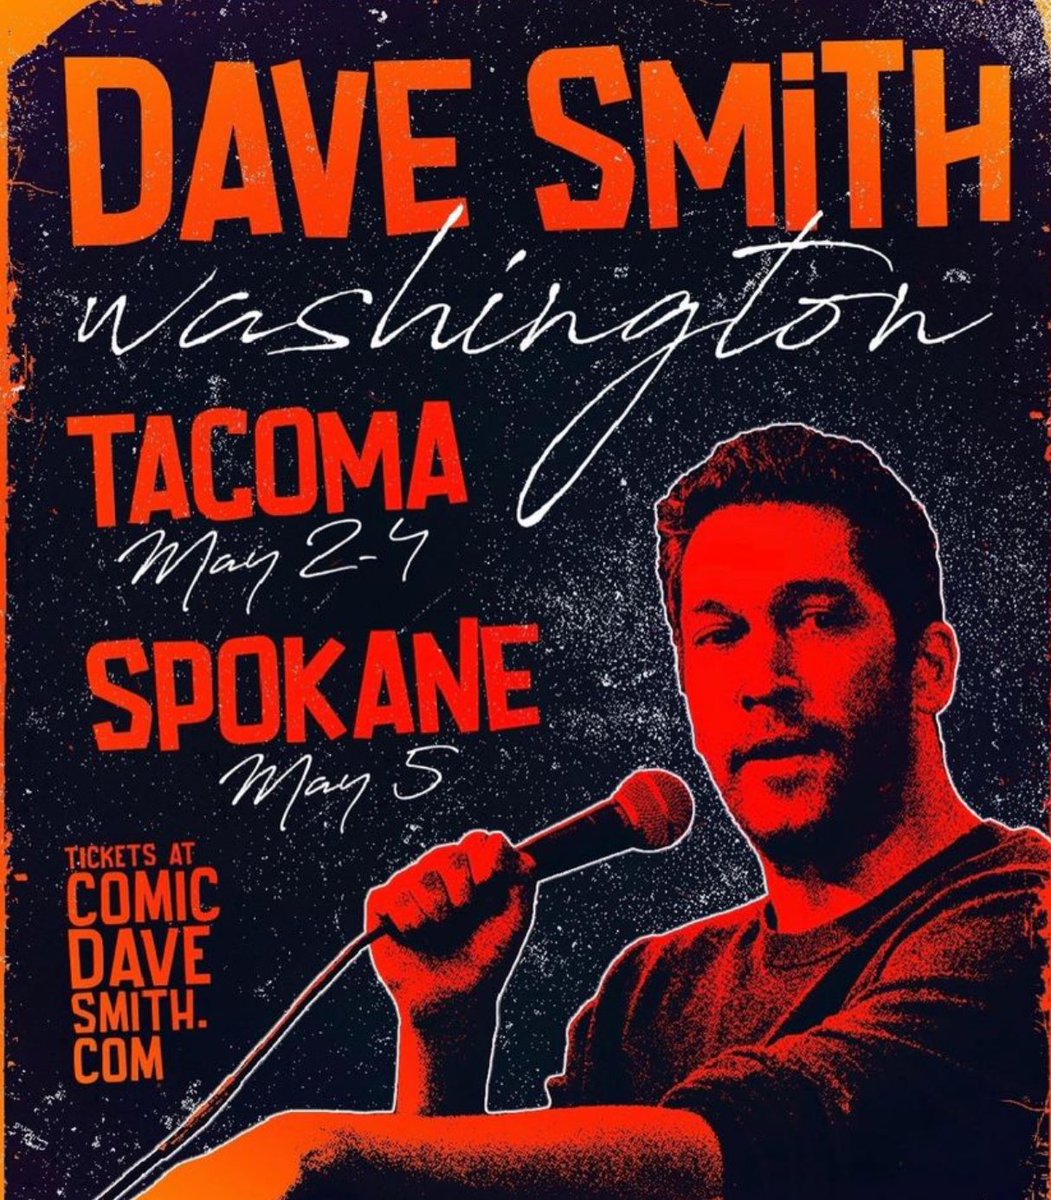 Dave Smith is taking over on 6th & Proctor with 3 nights of incredible comedy! Shows are already filling up so get those tickets while you can.